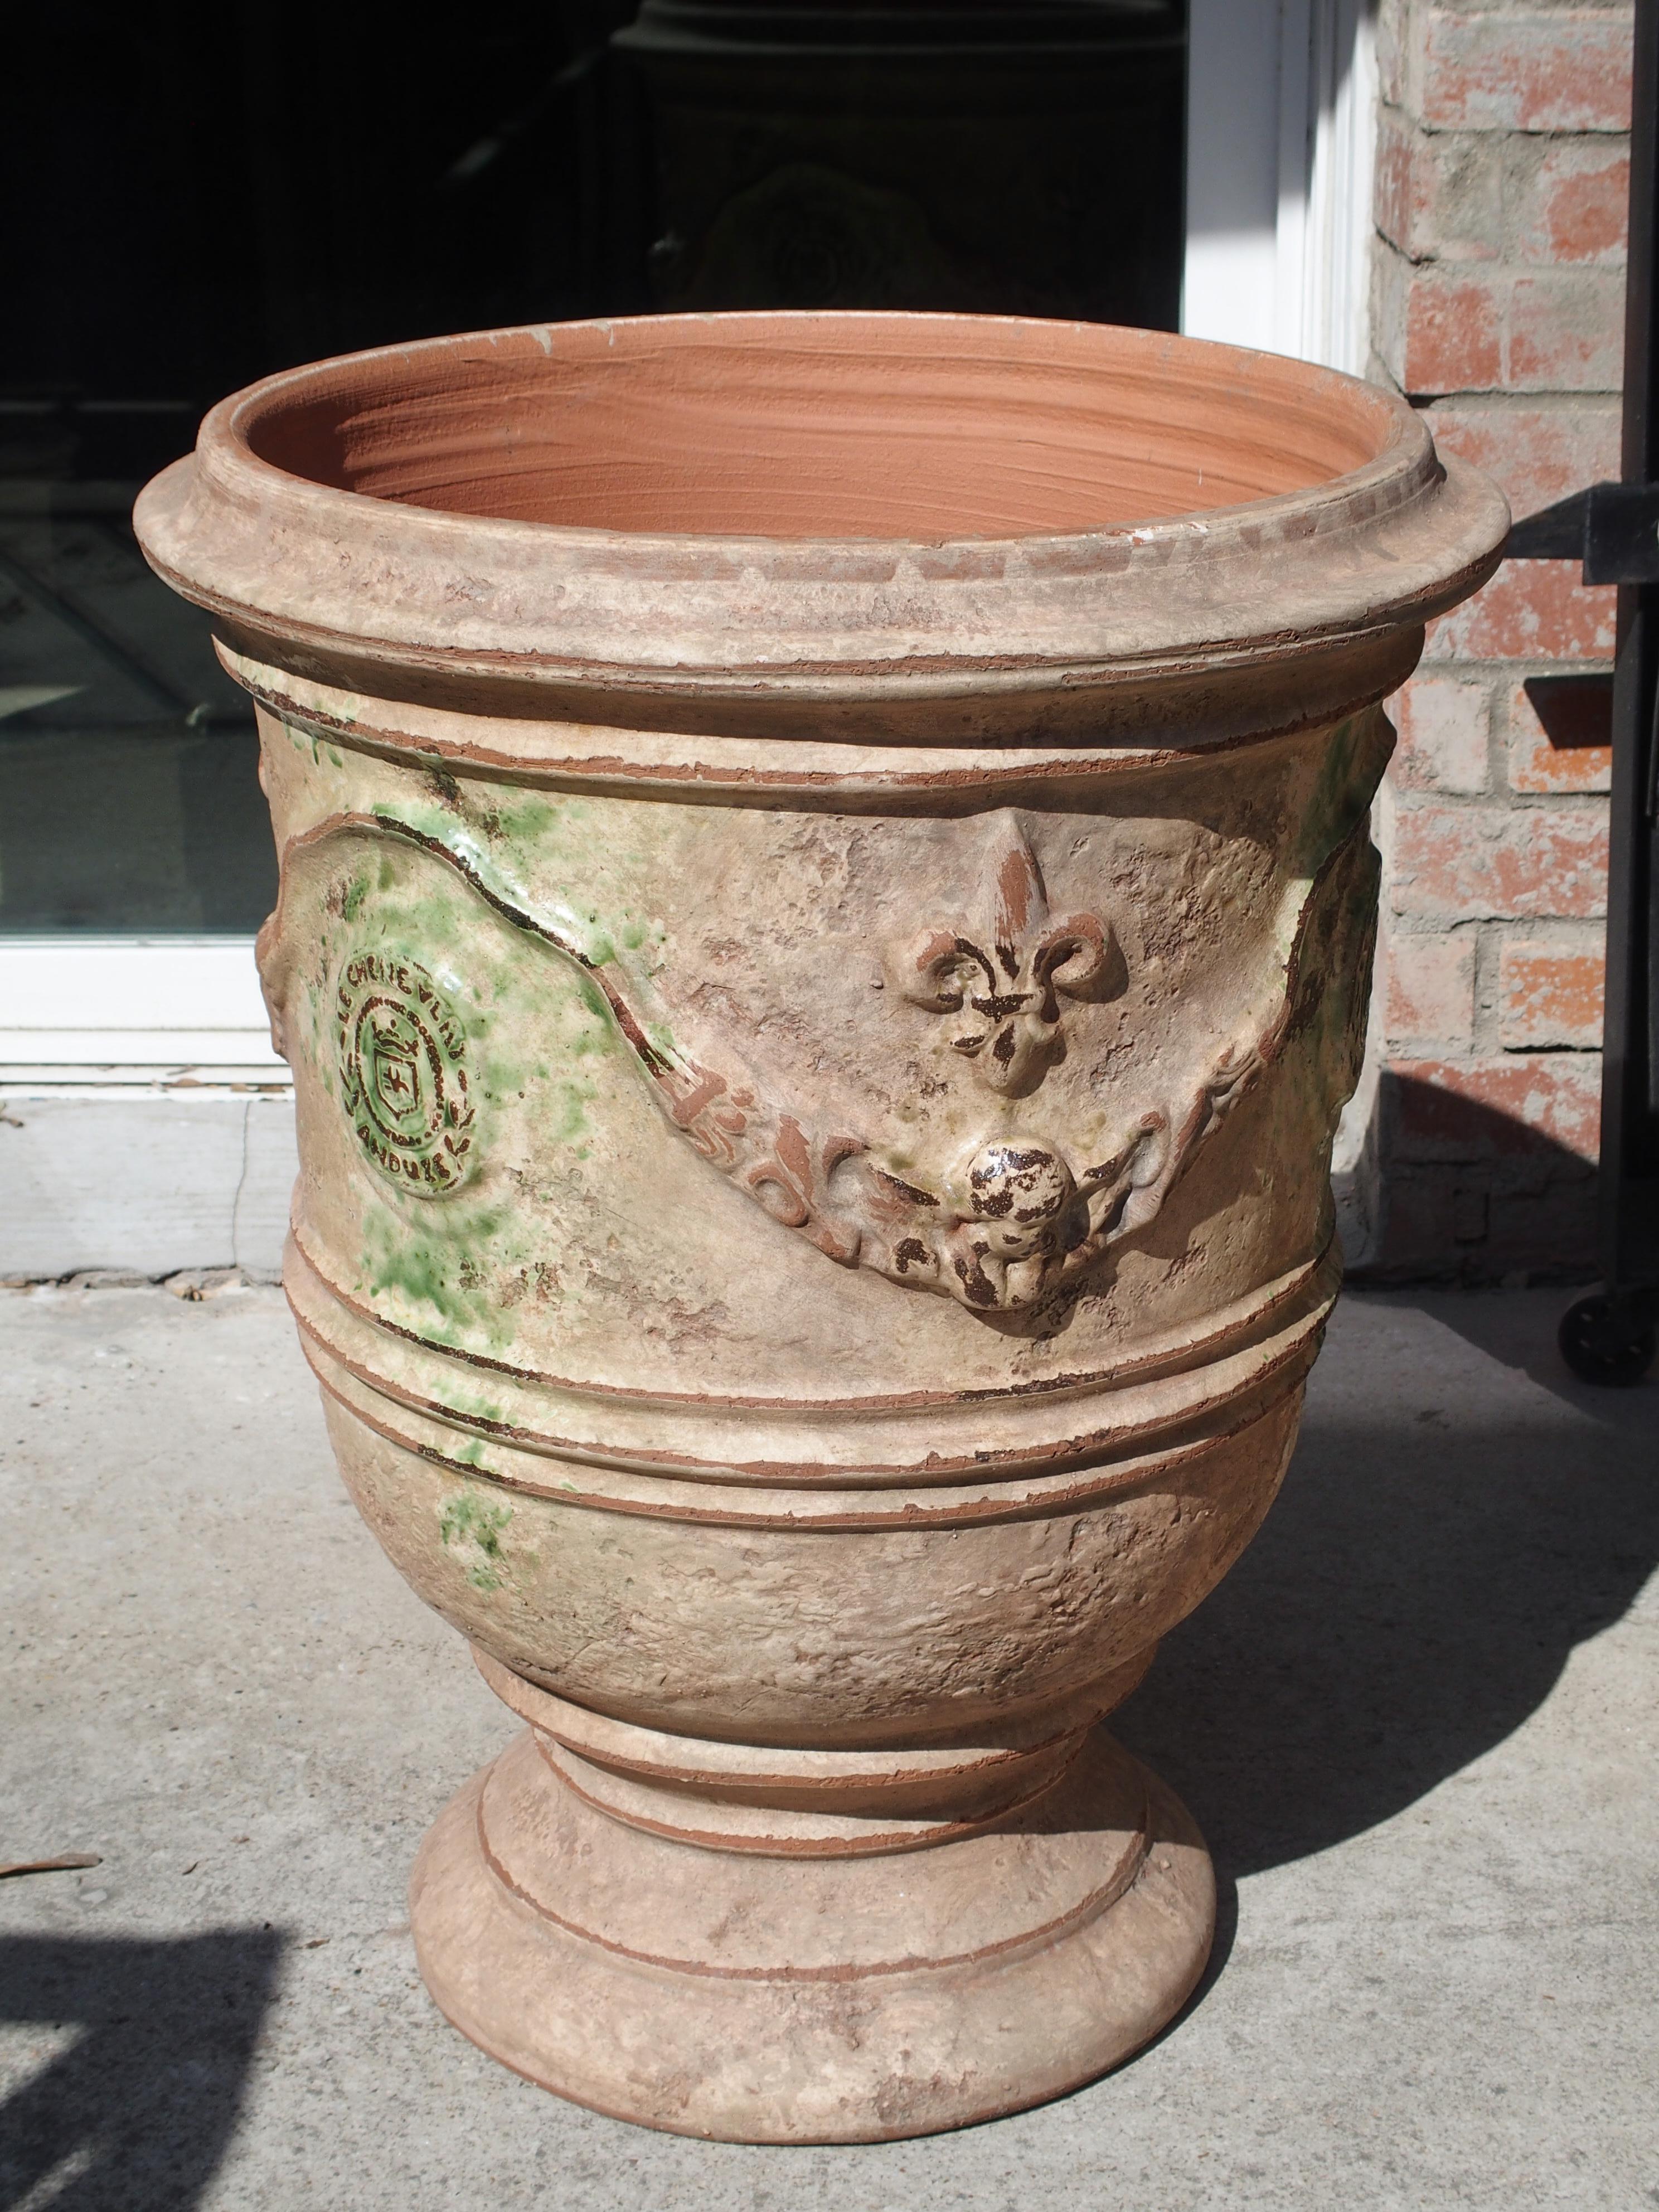 From Anduze, France, these wonderful, painted terracotta planters bring a classic South of France feel to any area, indoors or out. They have been produced since the early 1700s in varying designs and coloration and originally, were intended to hold